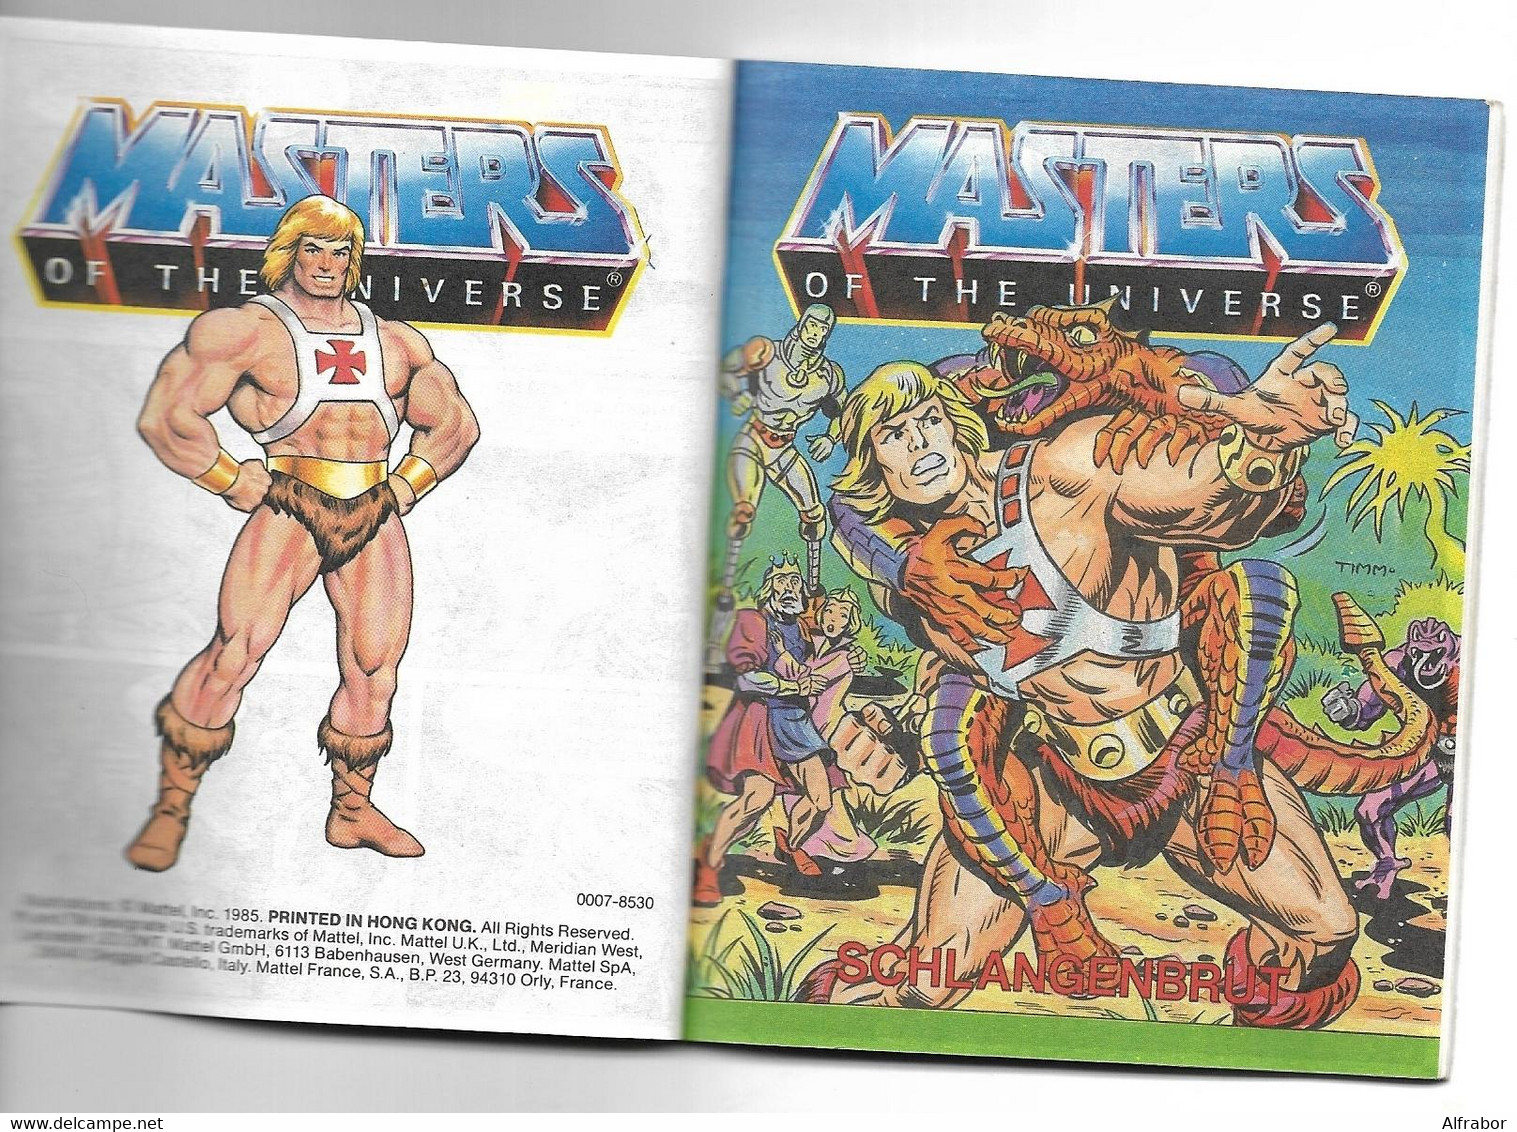 MASTERS OF THE UNIVERSE - COMICS BOOK 1985- LES SERPENTS ATTAQUENT /SNAKE ATTACK / SCHLANGENBRUT /L'ATTACO DEI SERPENTI- - Masters Of The Universe